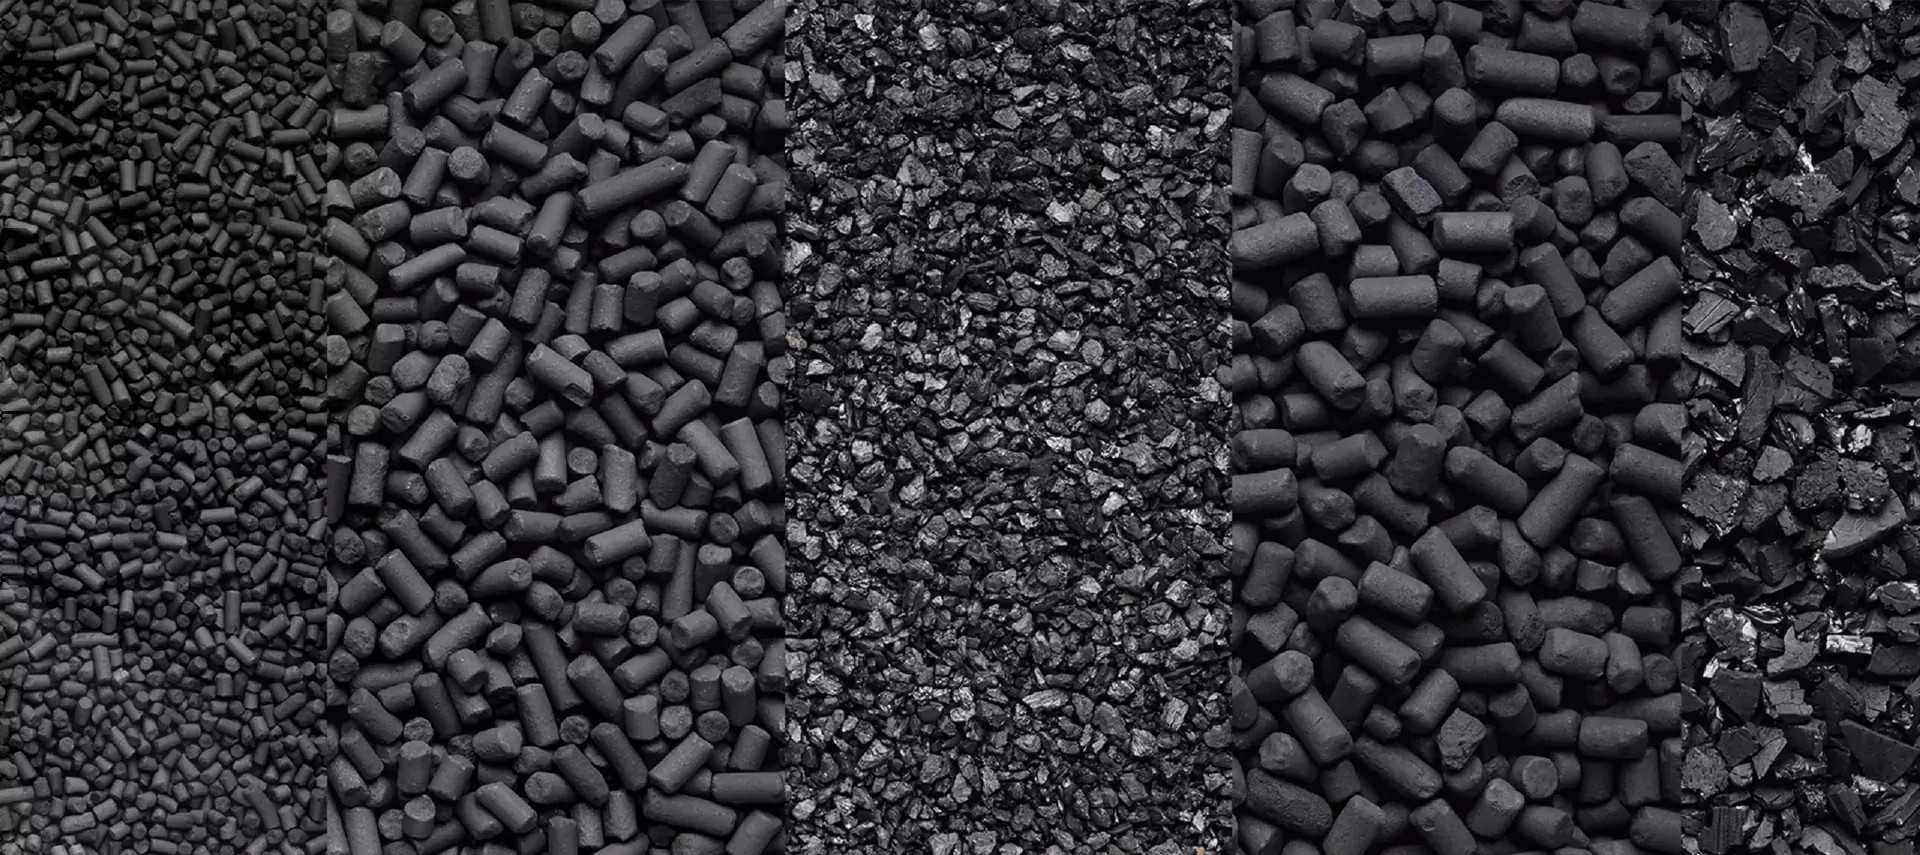 Home - CarboTech Gruppe Leading supplier of activated carbon